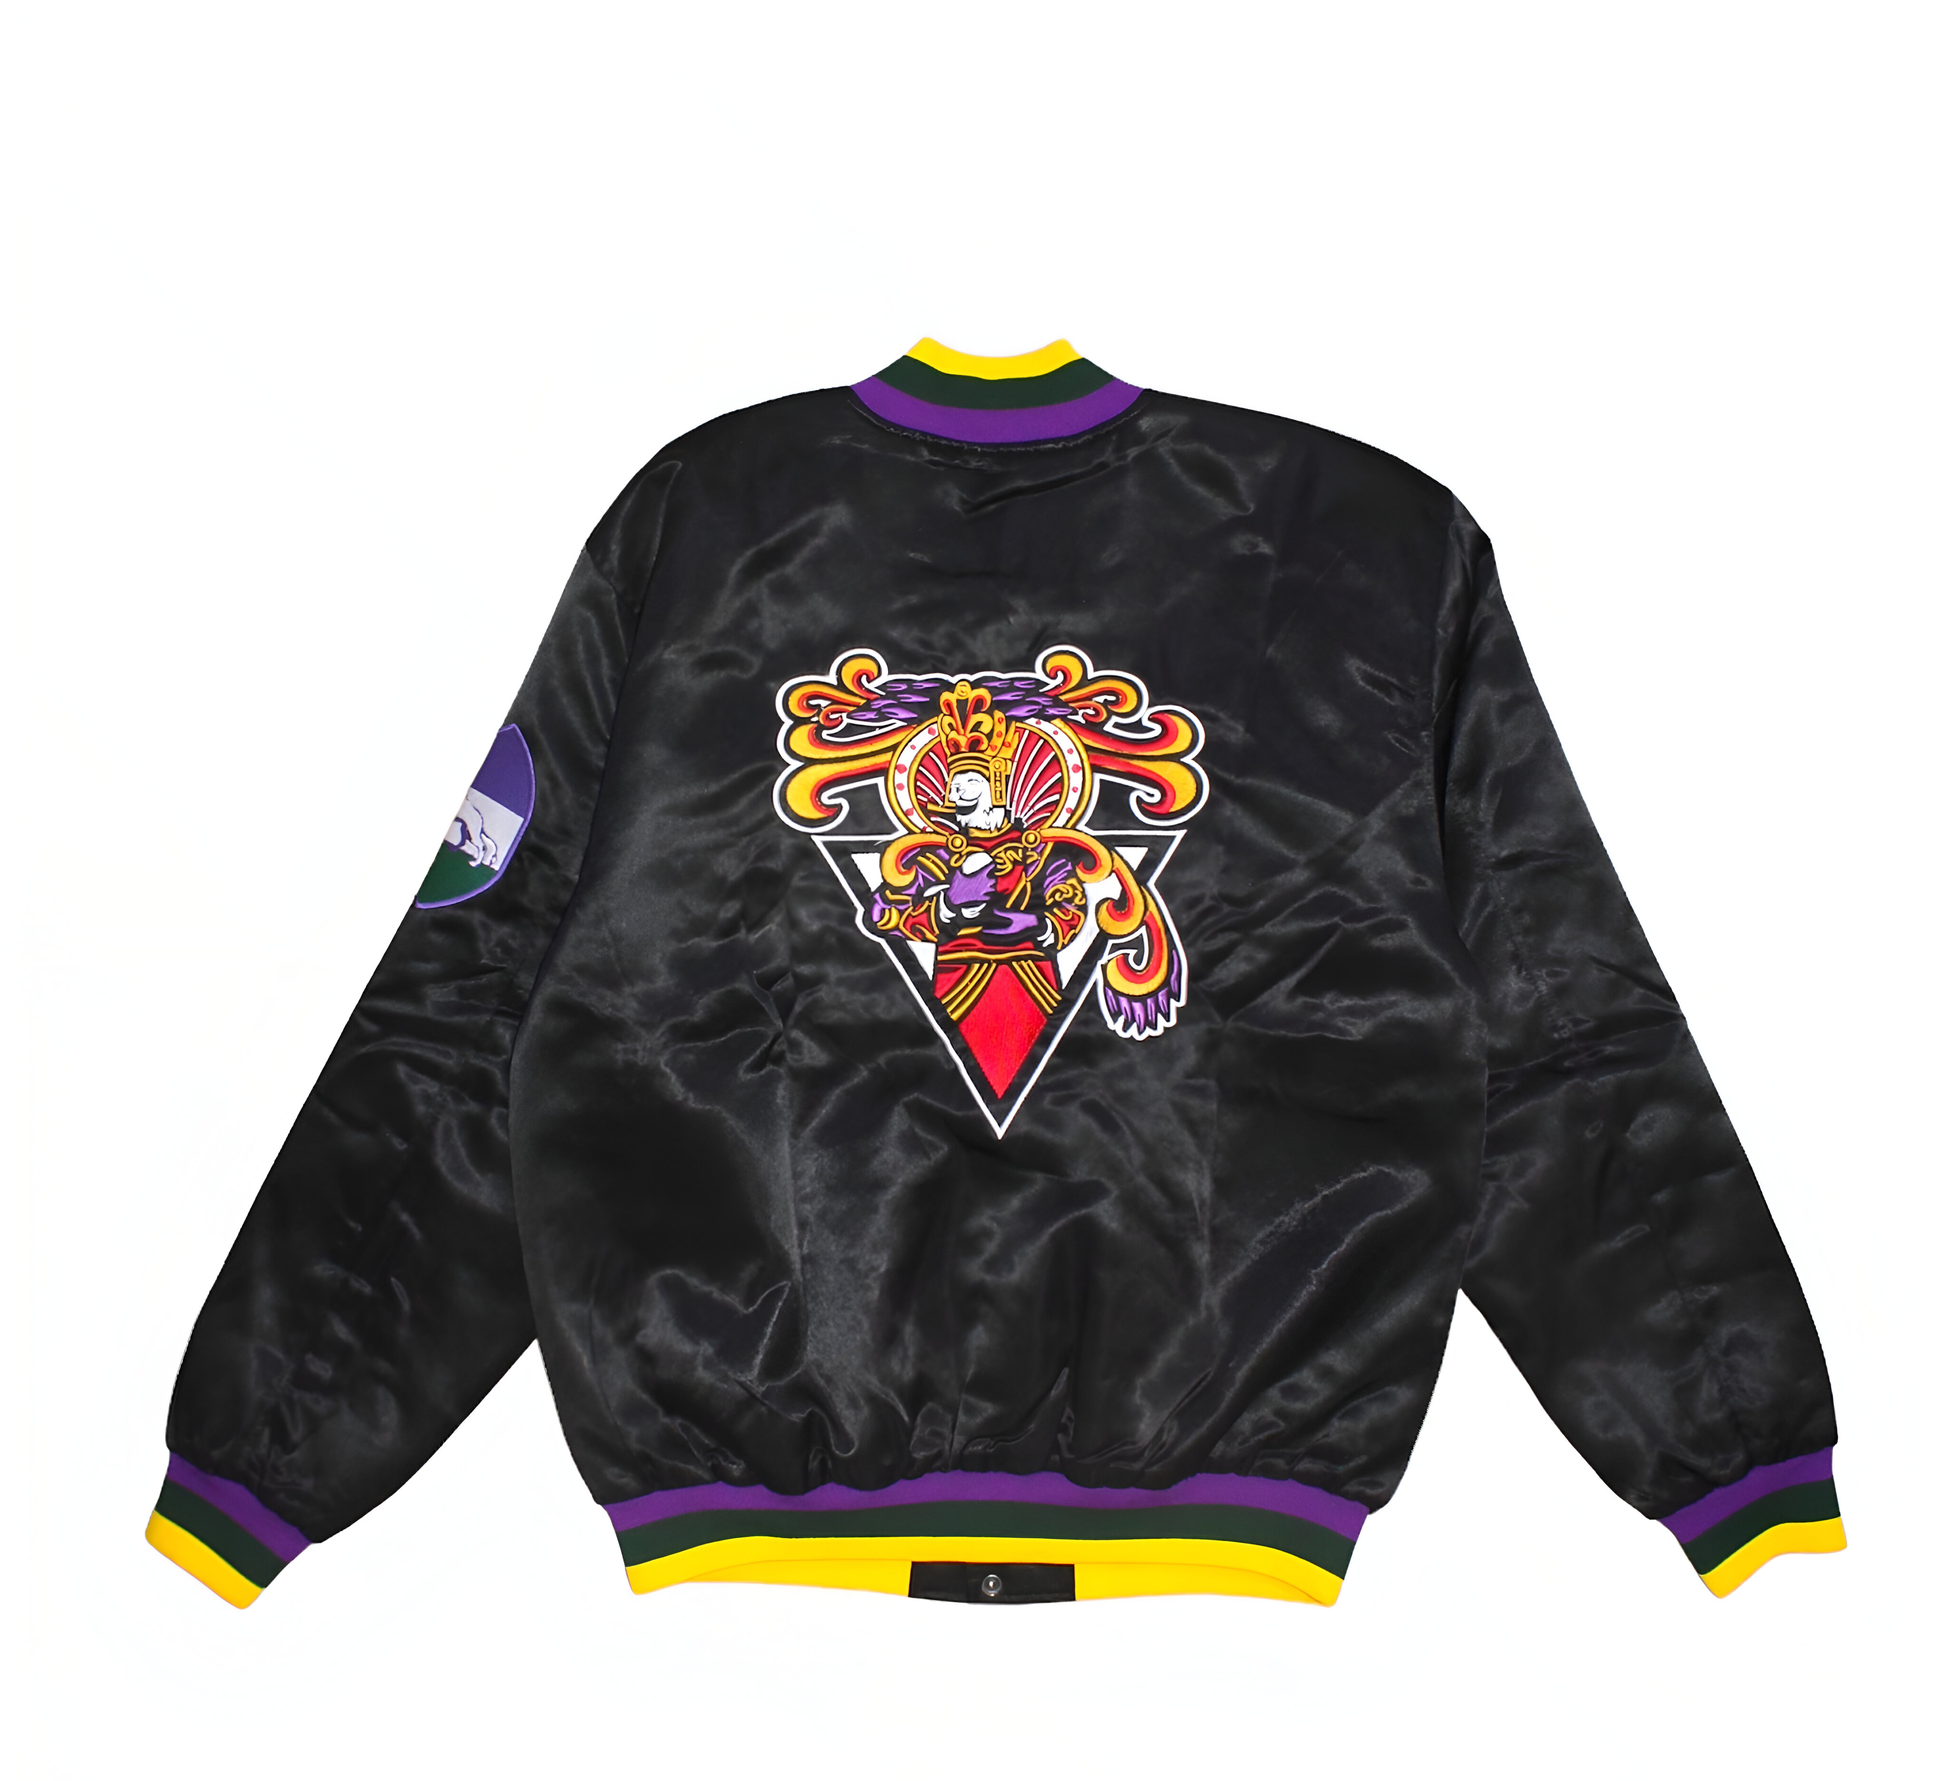 Back view of Royalty10 Zulu Mardi Gras 23 Satin Bomber Jacket: showcasing the embroidered logo and vibrant design, ideal for festive Mardi Gras celebrations.